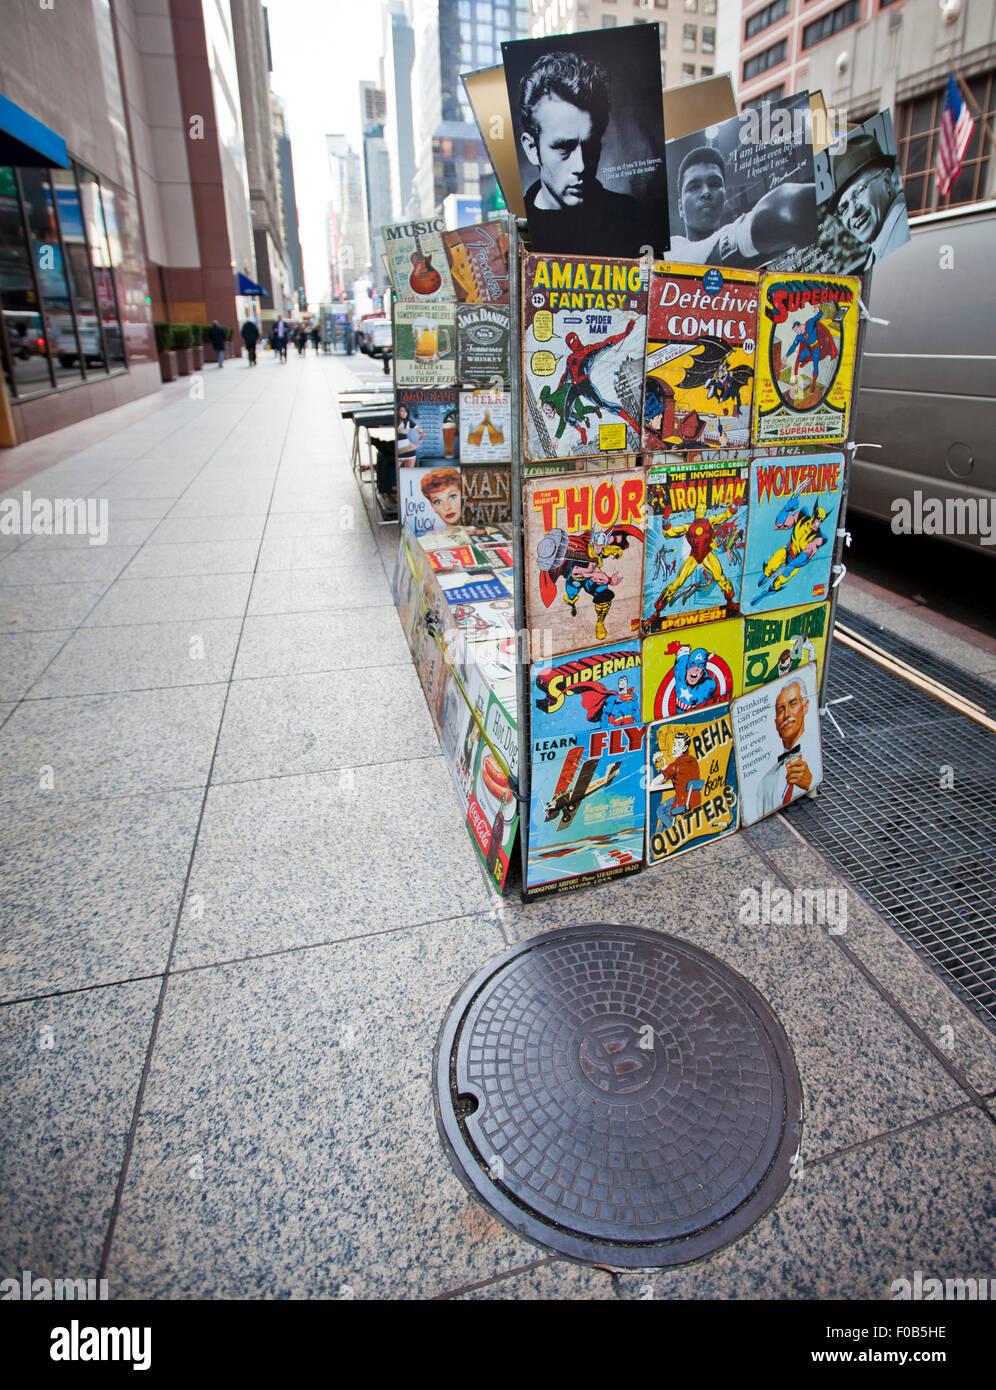 NEW YORK, USA - NOVEMBER 13th, 2014: Street art sales stand a common and popular way to buy artwork in New York. Stock Photo